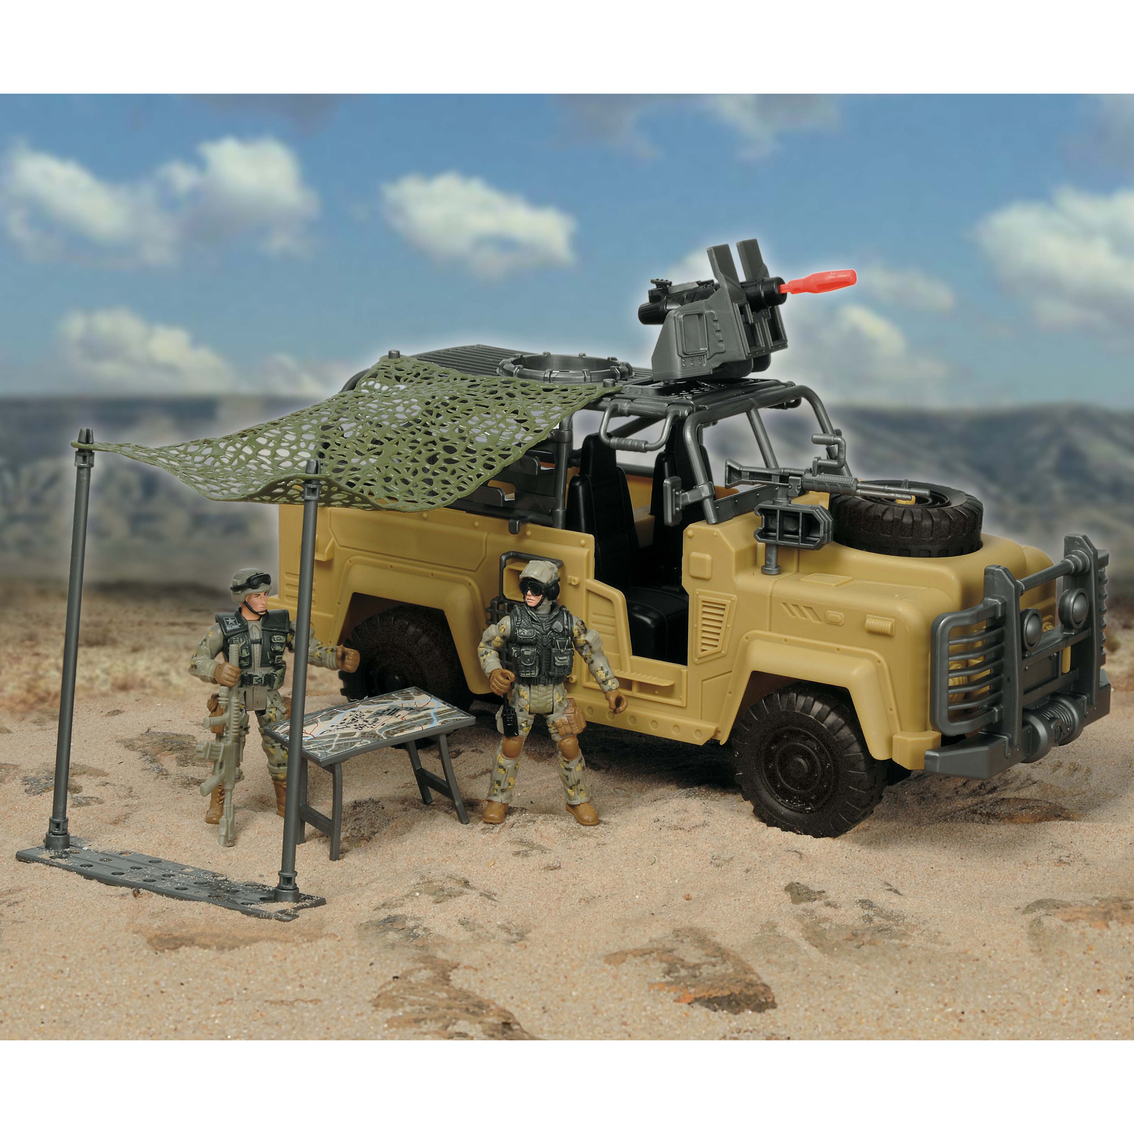 Excite U.S. Army Playset - Image 3 of 3